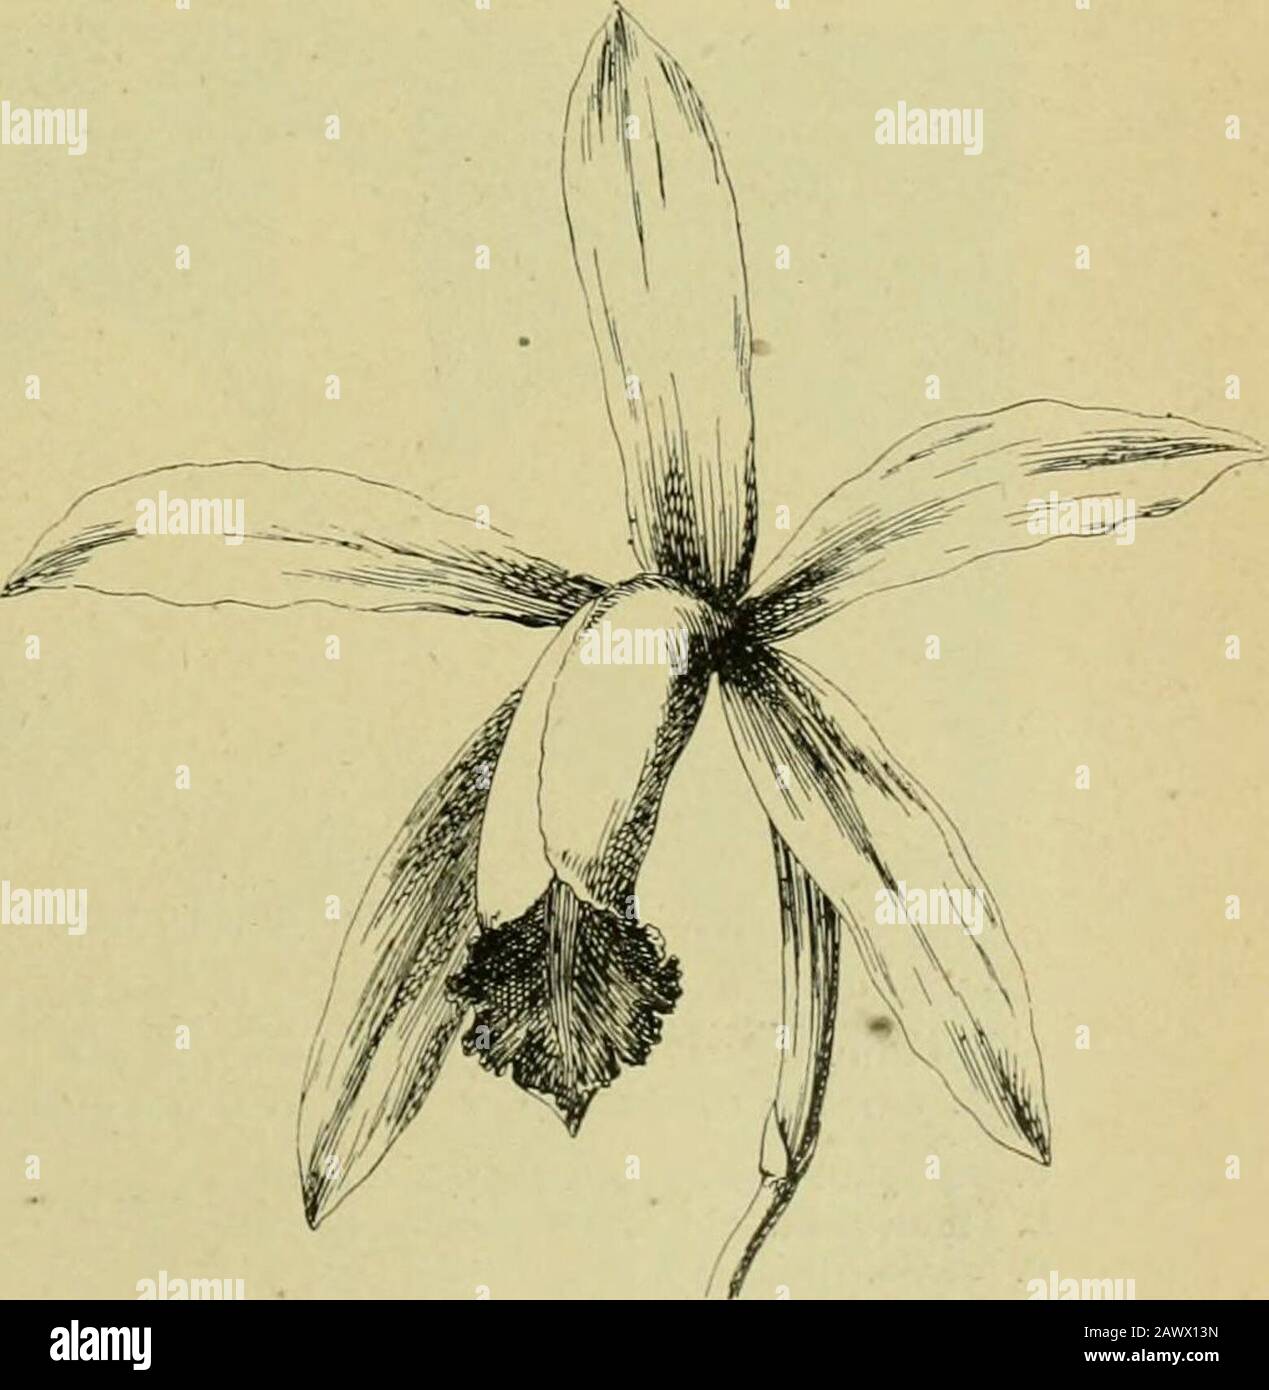 The century supplement to the dictionary of gardening, a practical and scientific encyclopaedia of horticulture for gardeners and botanists . Fig. 216. Flower of Cattleya guttata Leopoldii. strap-like, complicate at base, emarginate at apex. Stems 4in.to 5m. long, one-leaved. Native country unknown. C. Kimballiana (Kimballs) Jl. large; sepals and petals of adelicate rosy-white, the former lanceolate, acute, the latter verybroad, elliptic, wavy ; tube of the lip white outside, with someyellow near the front margins, the inside yellow with someorange lines, the wavy front lobe rich purple on the Stock Photo